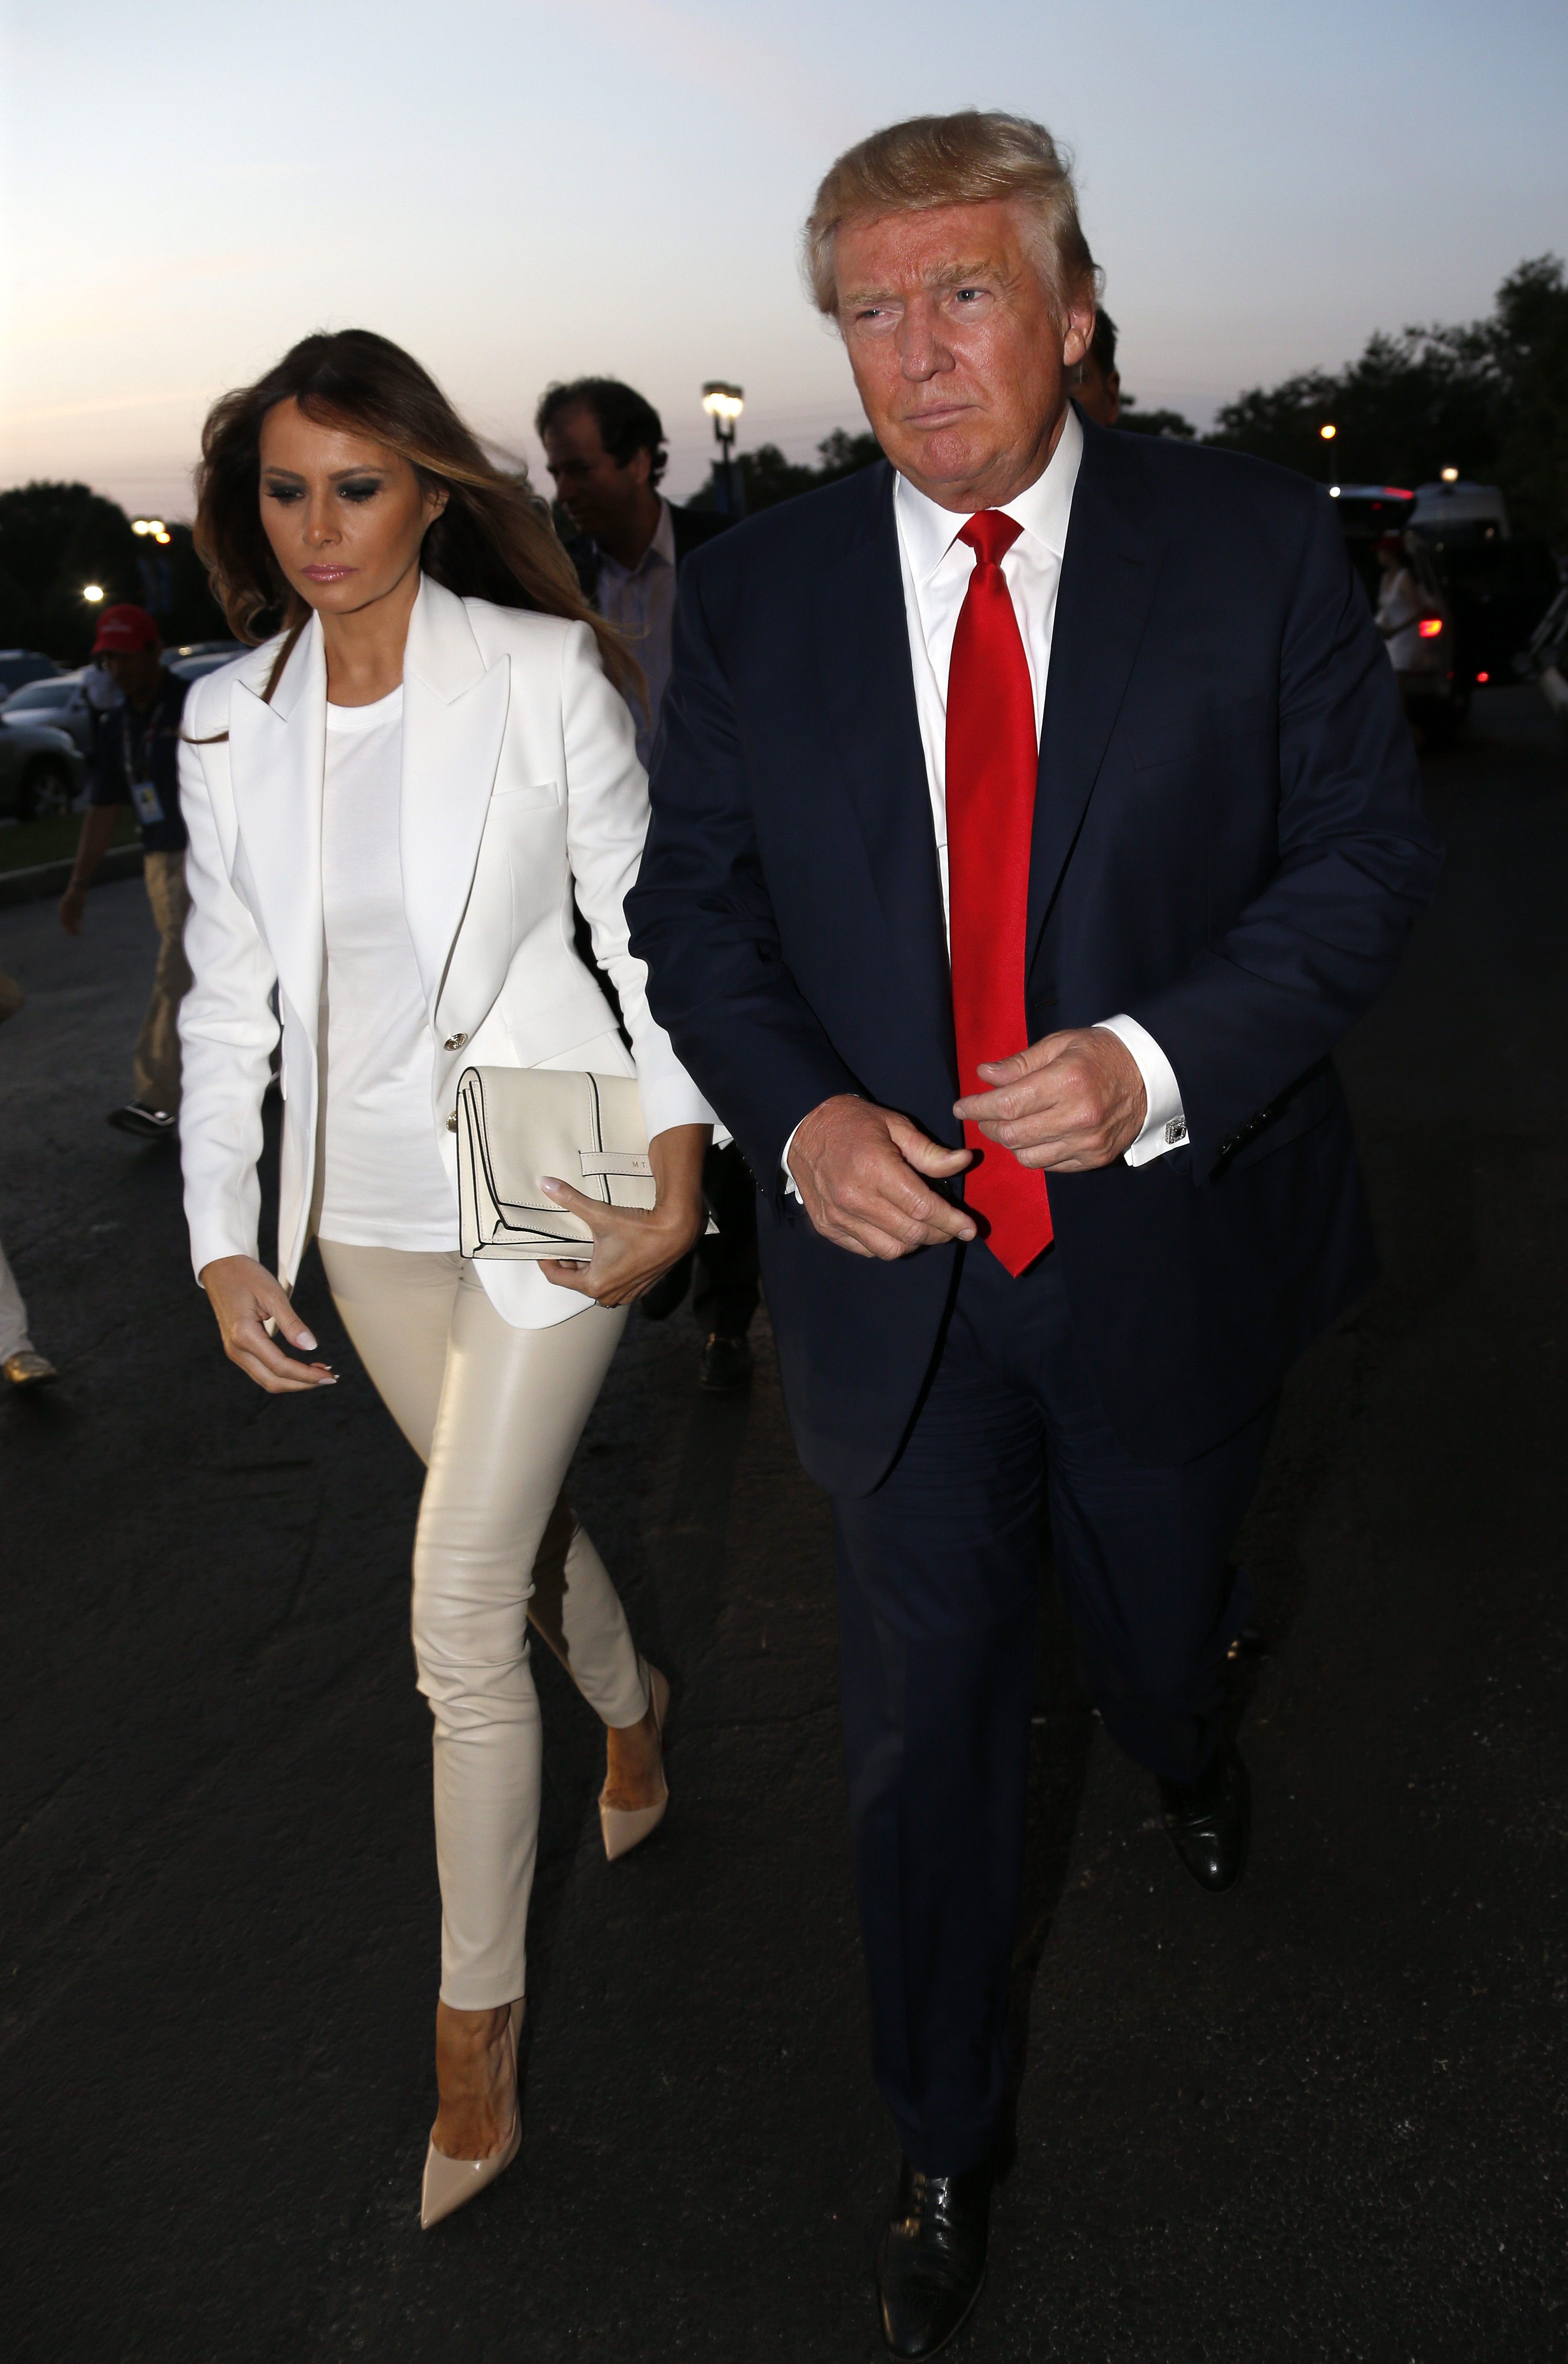 Donald Trump and his wife Melania Trump attend the Williams sisters match on day nine of the 2015 US Open at USTA Billie Jean King National Tennis Center on Sept. 8, 2015 in New York City. (Jean Catuffe—GC Images)